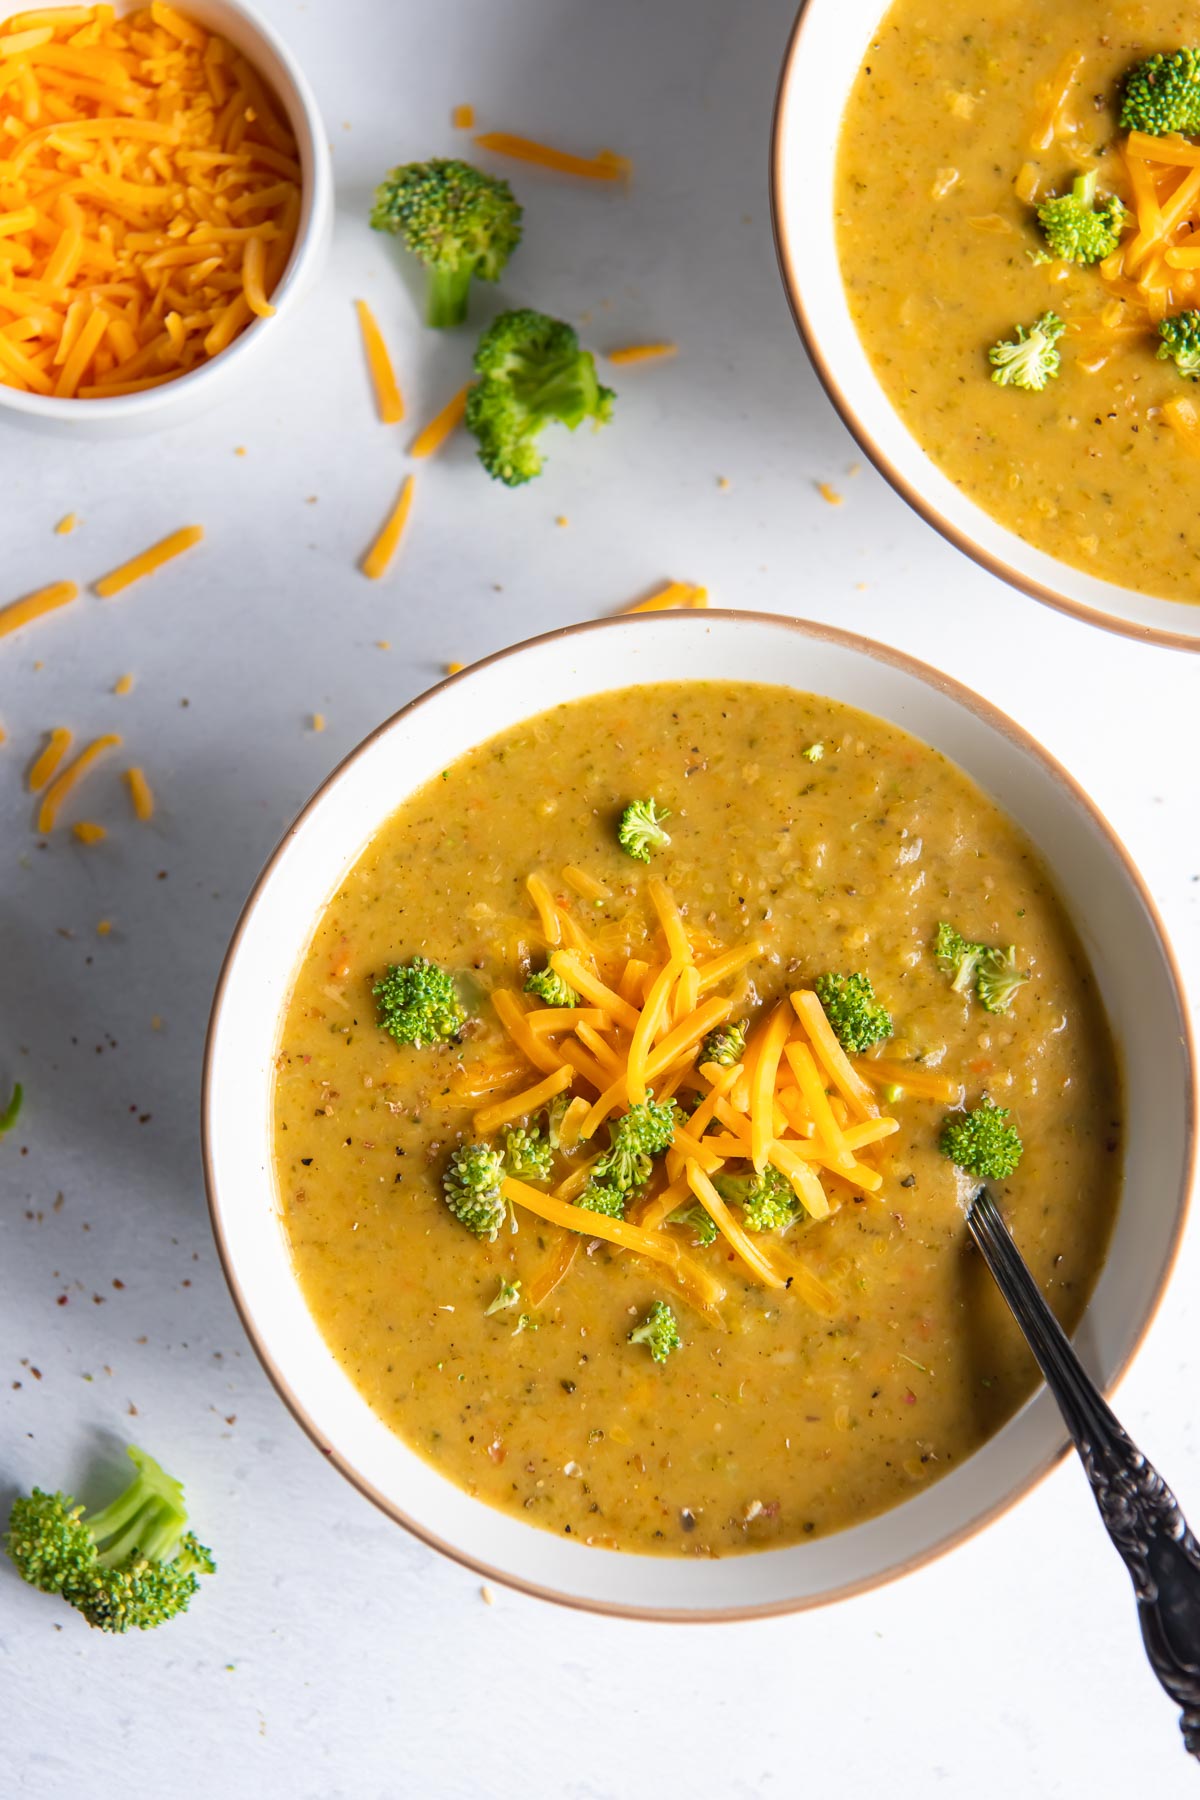 Instant Pot broccoli cheddar soup in a bowl with a spoon.